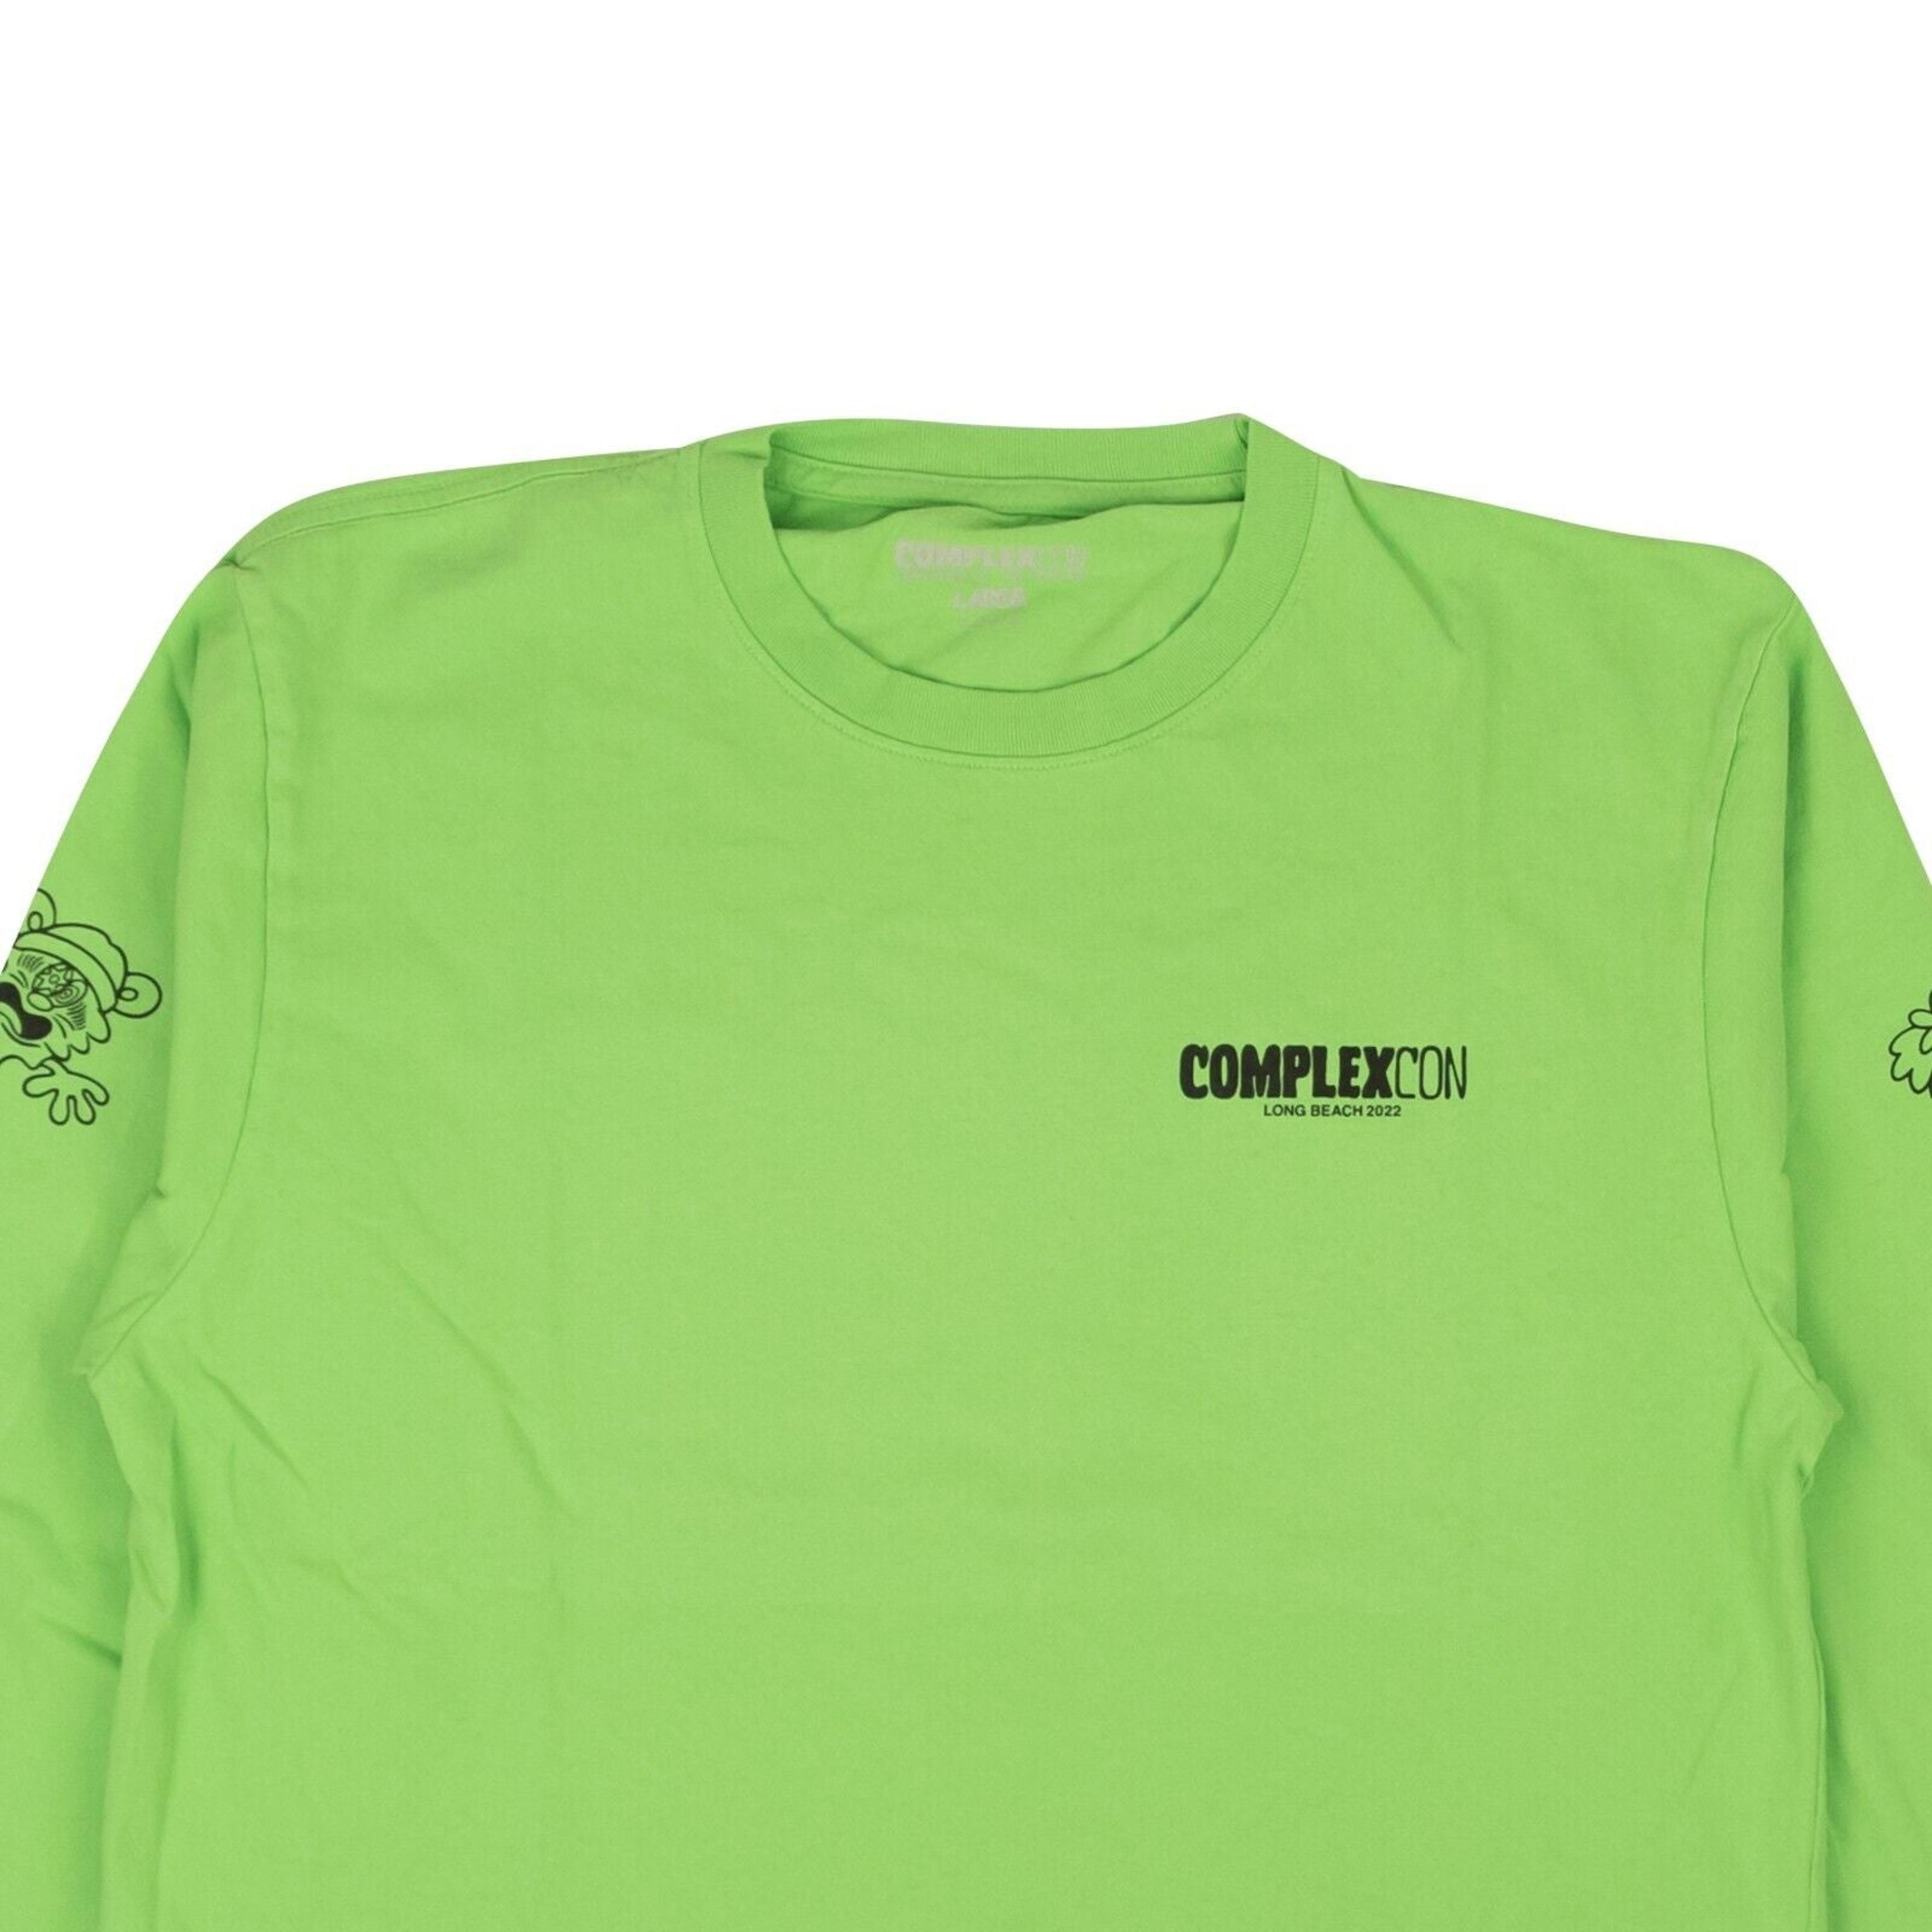 Alternate View 1 of Complexcon X Verdy Ls Tee - Green